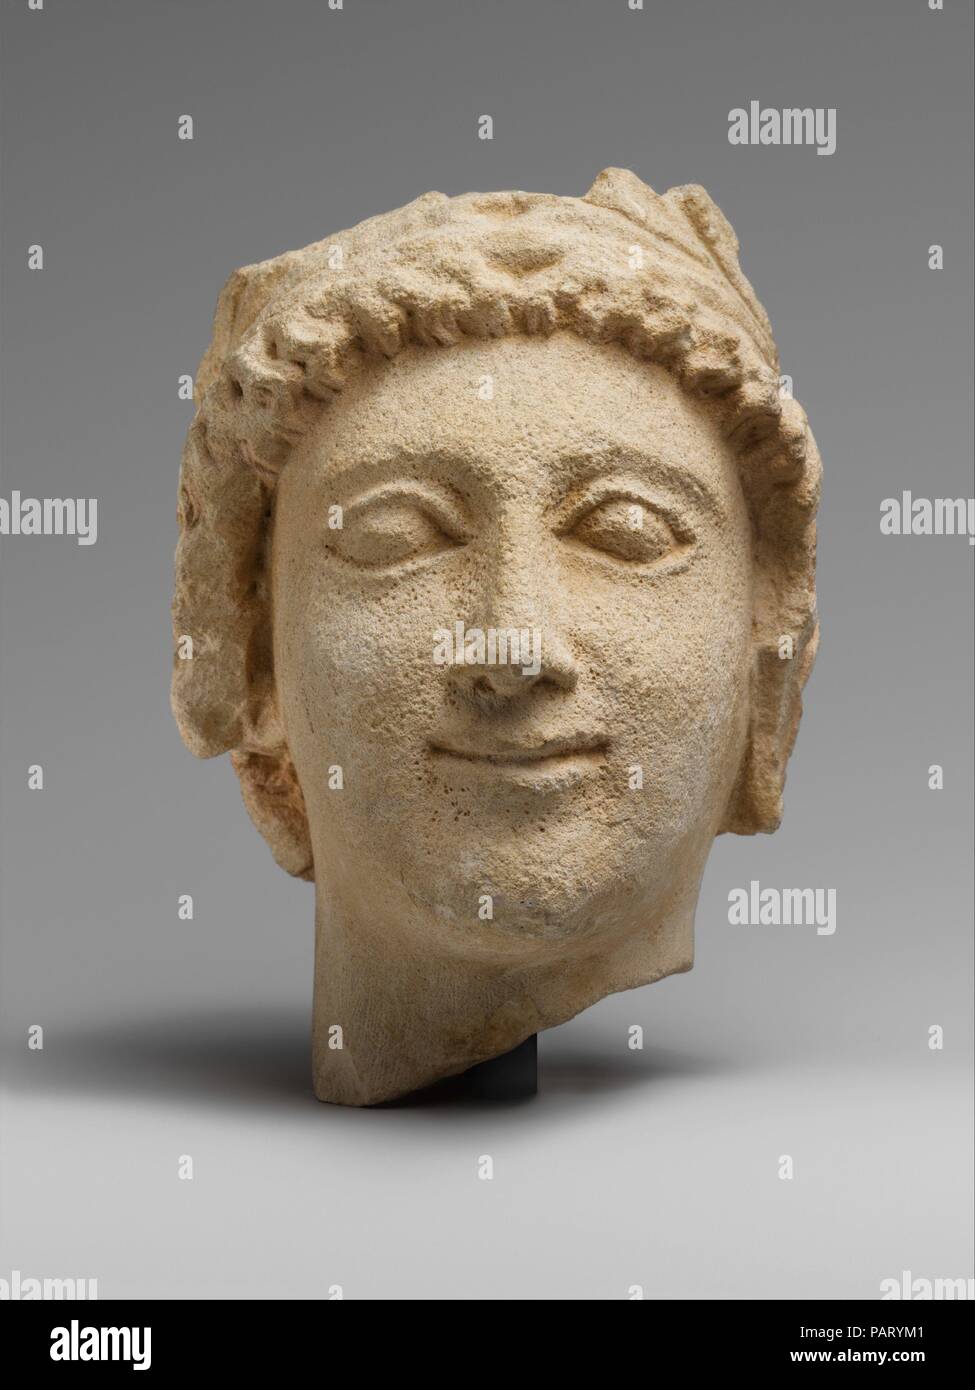 Limestone head of a wreathed youth. Culture: Cypriot. Dimensions: Overall: 5 1/2 x 3 3/8 x 4 3/4 in. (14 x 8.6 x 12.1 cm). Date: 5th century B.C..  Head of a youth wearing a wreath with an oval-shaped, smiling face, a long pointed nose, bulging eyeballs with thick eyelids, and low-set eyebrows. Museum: Metropolitan Museum of Art, New York, USA. Stock Photo